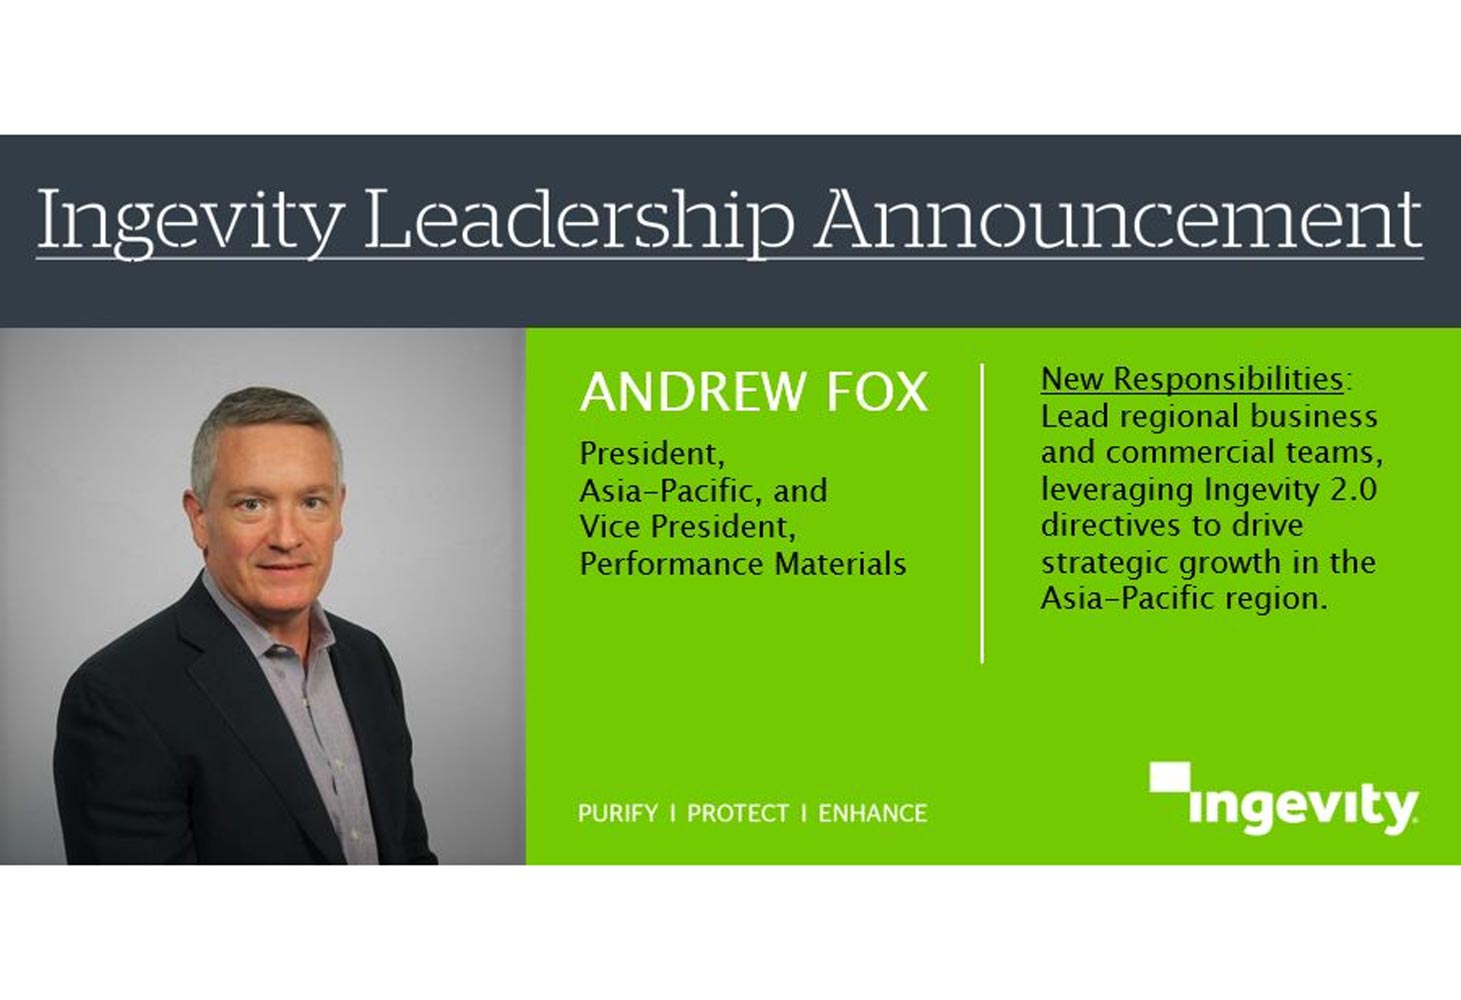 Ingevity appoints Andrew Fox as president for Asia Pacific